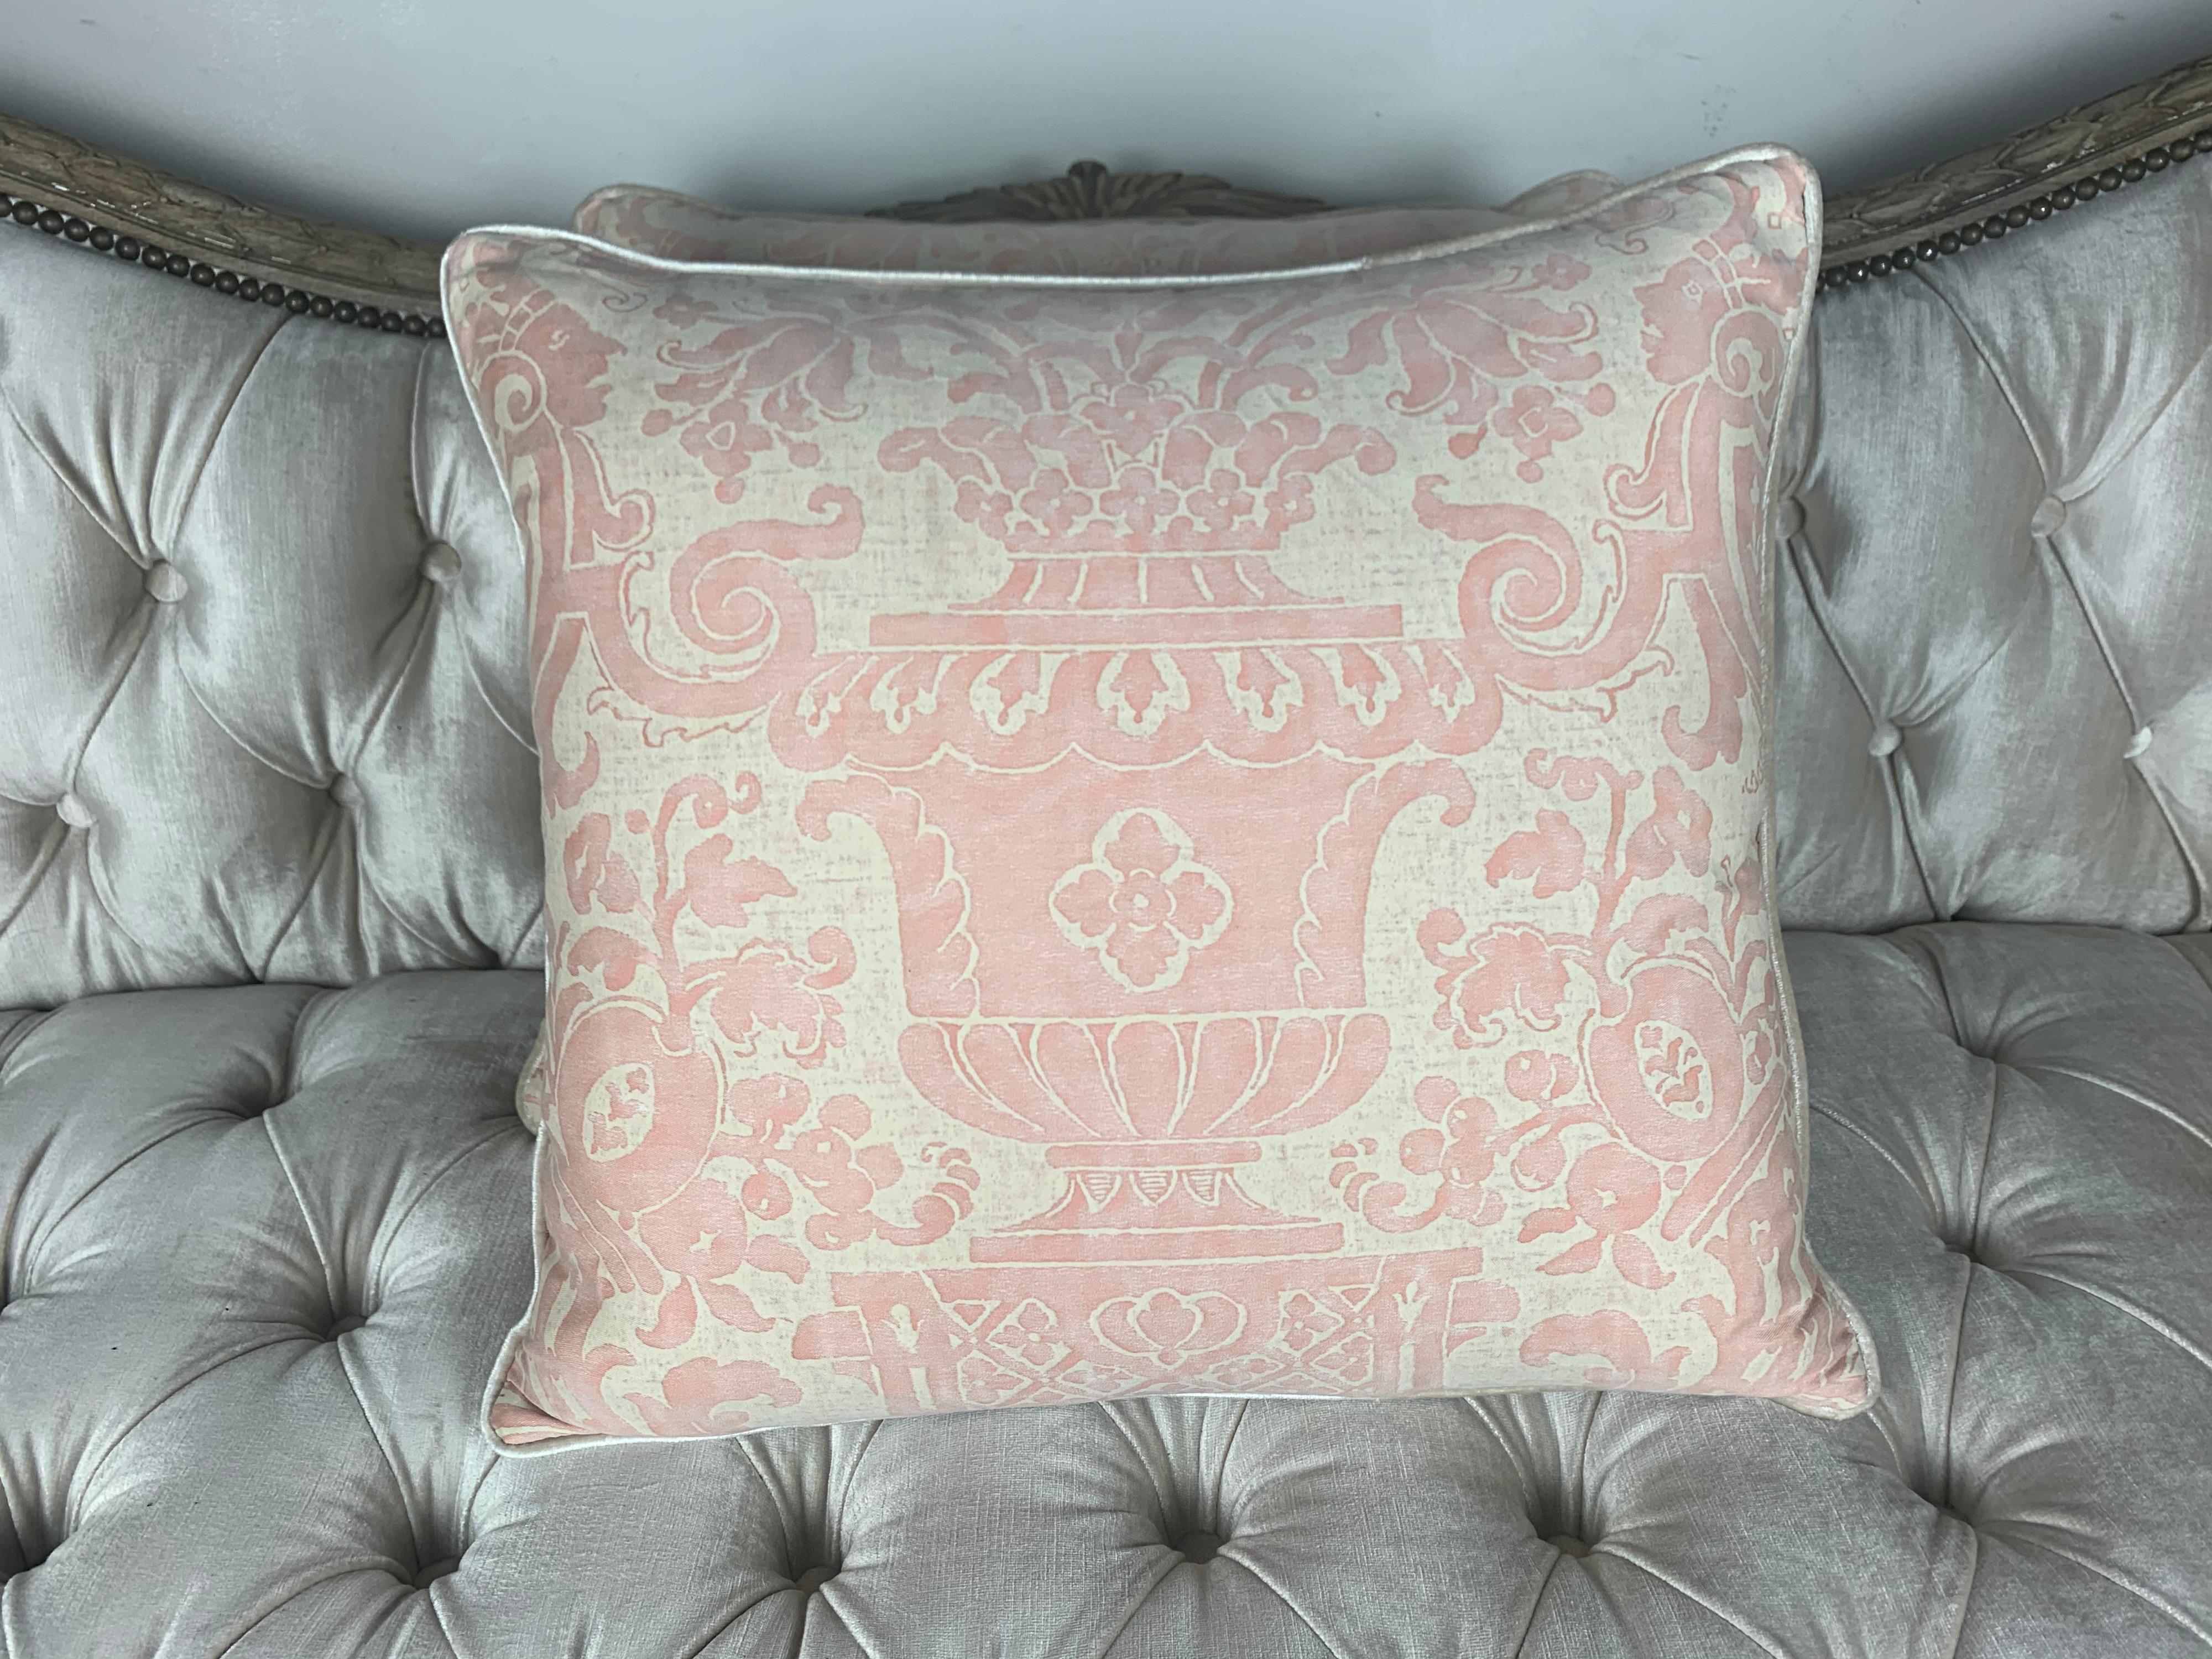 Cotton Pair of Carnevalet Patterned Fortuny Pillows